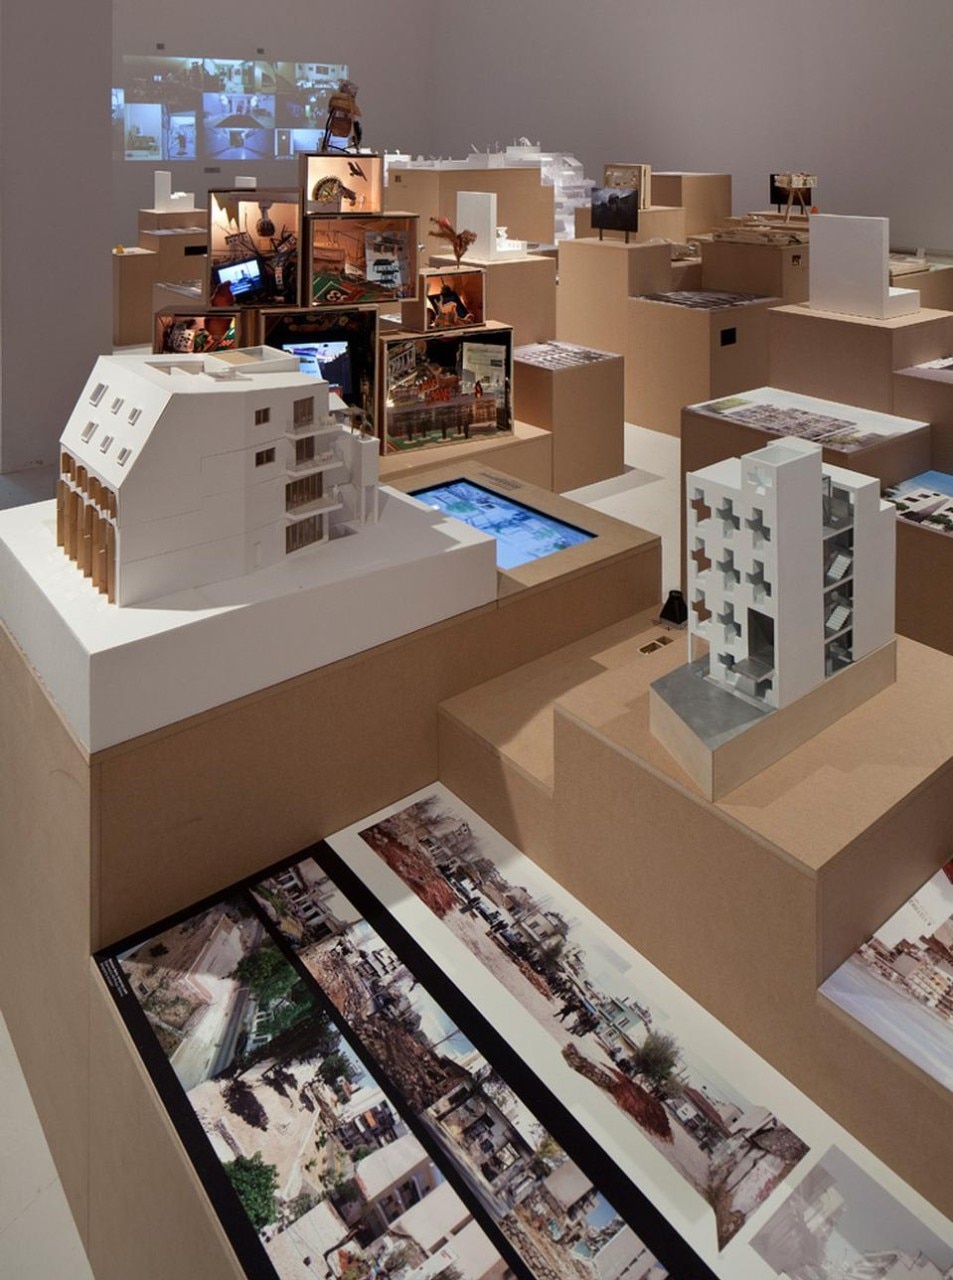 <em>Made in Athens</em>, the Greek Pavilion at the 13th International Architecture Exhibition — Venice Biennale